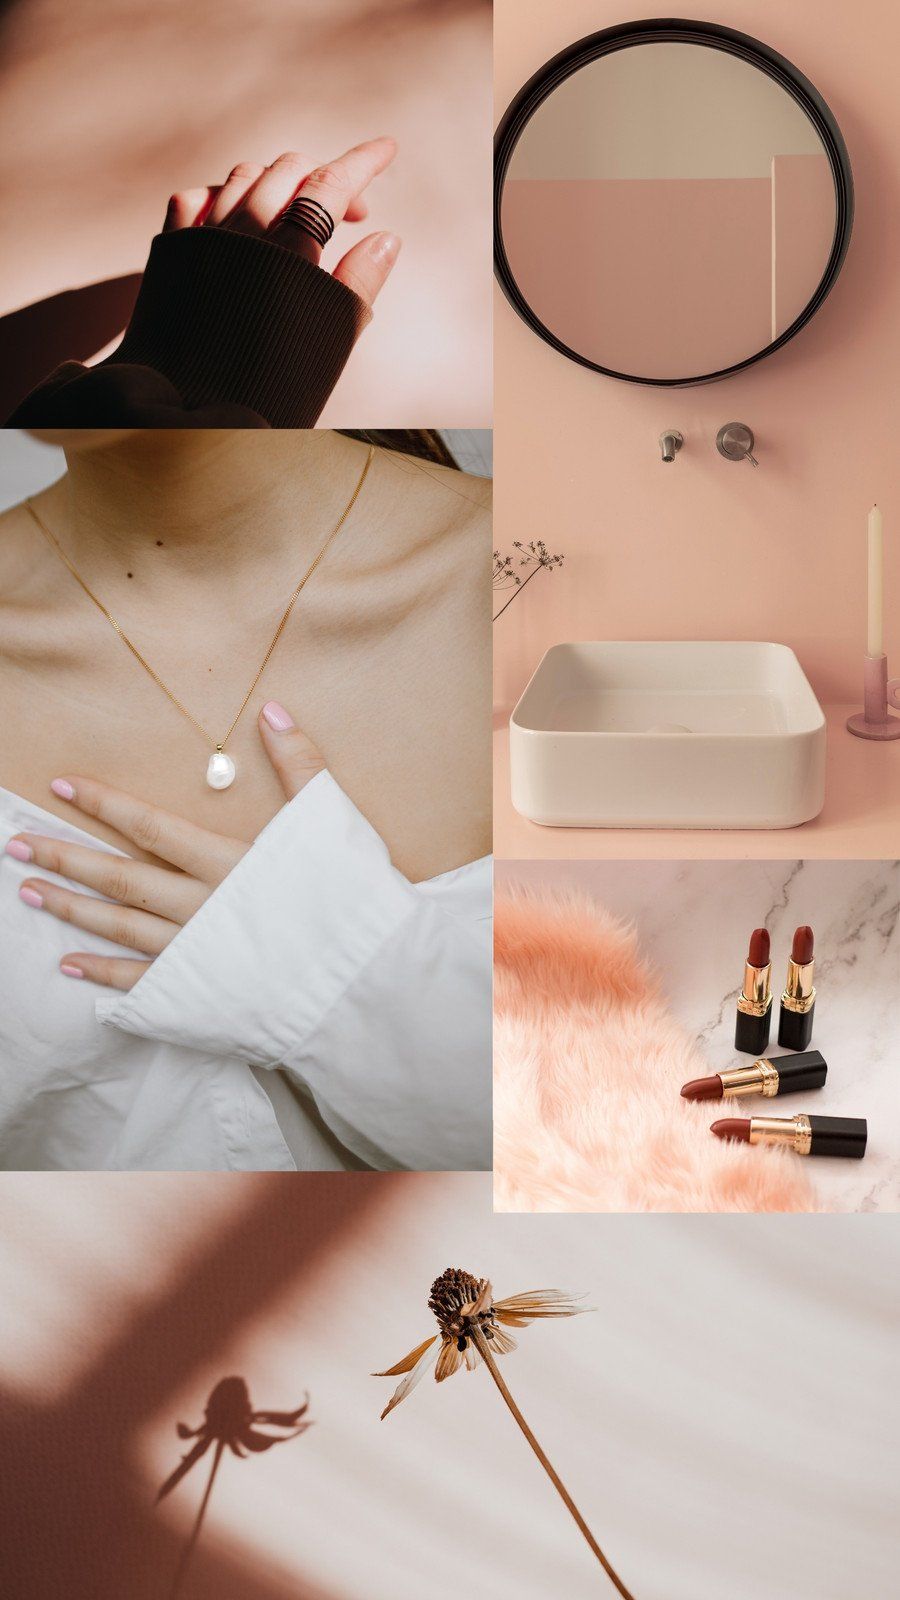 A collage of images including a mirror, jewelry, and makeup. - Blush